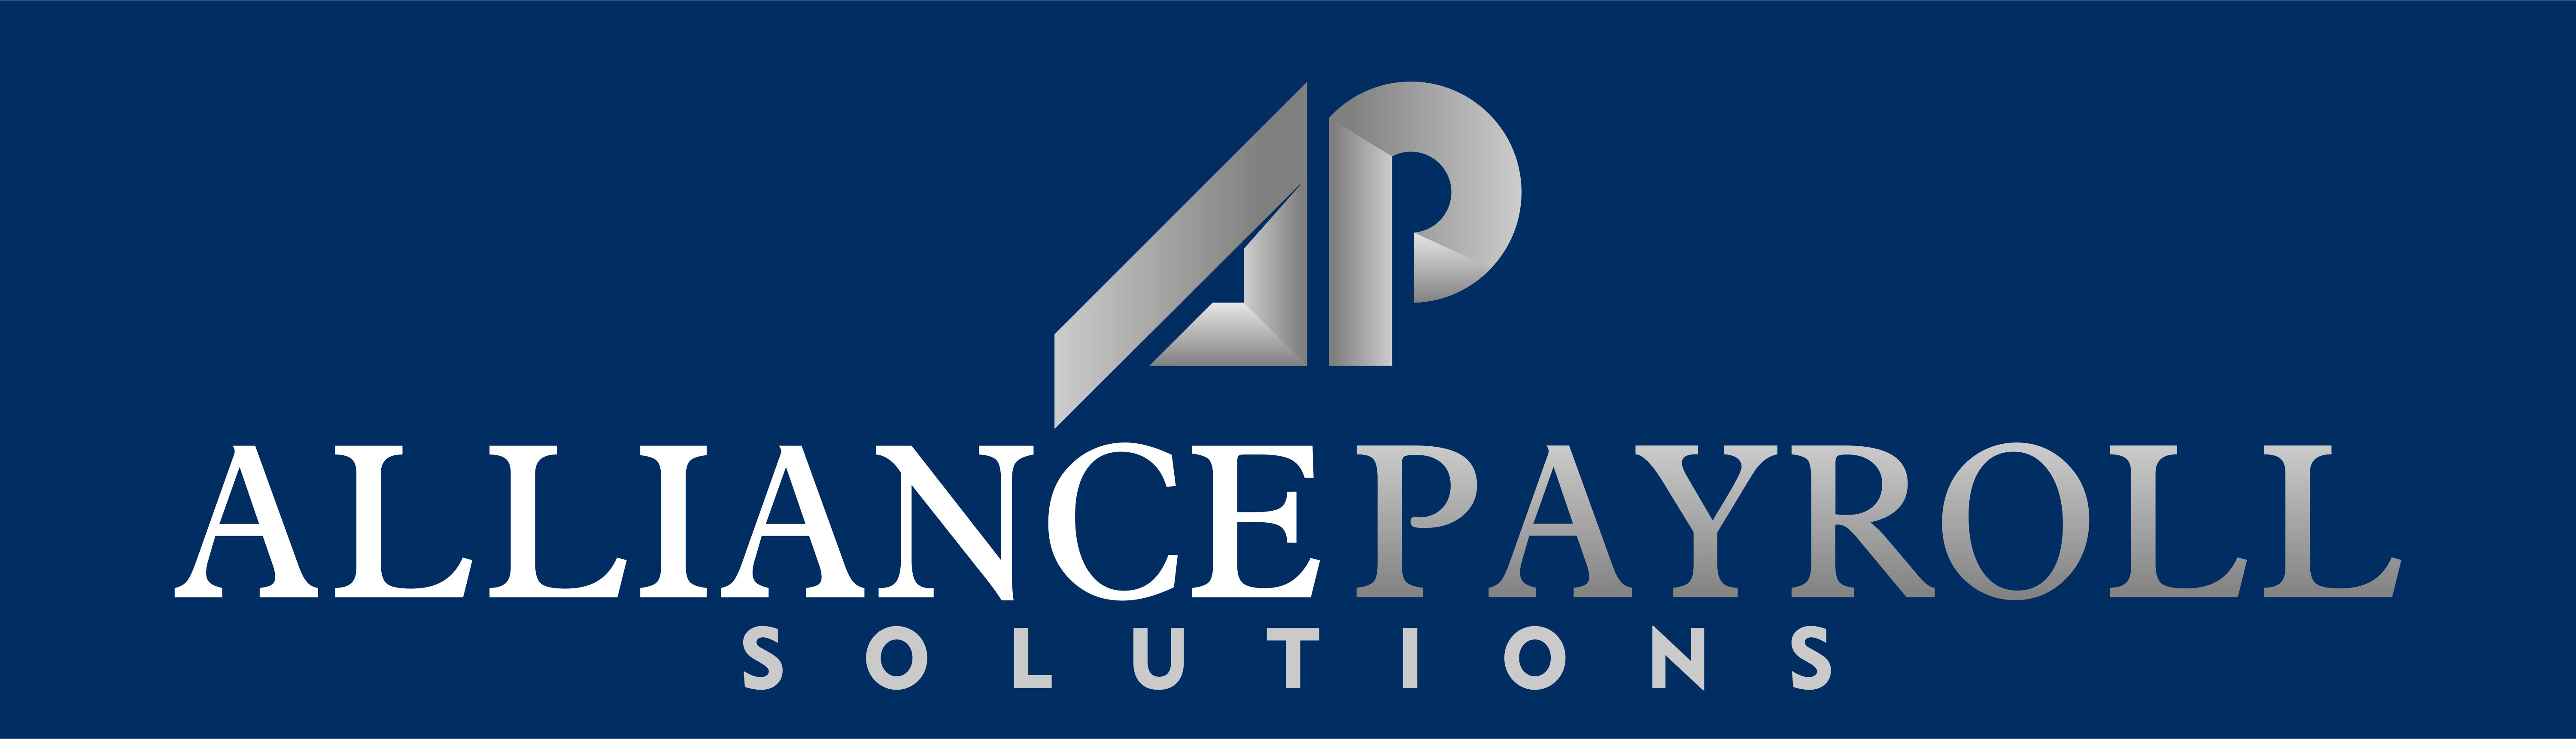 Alliance Payroll Solutions